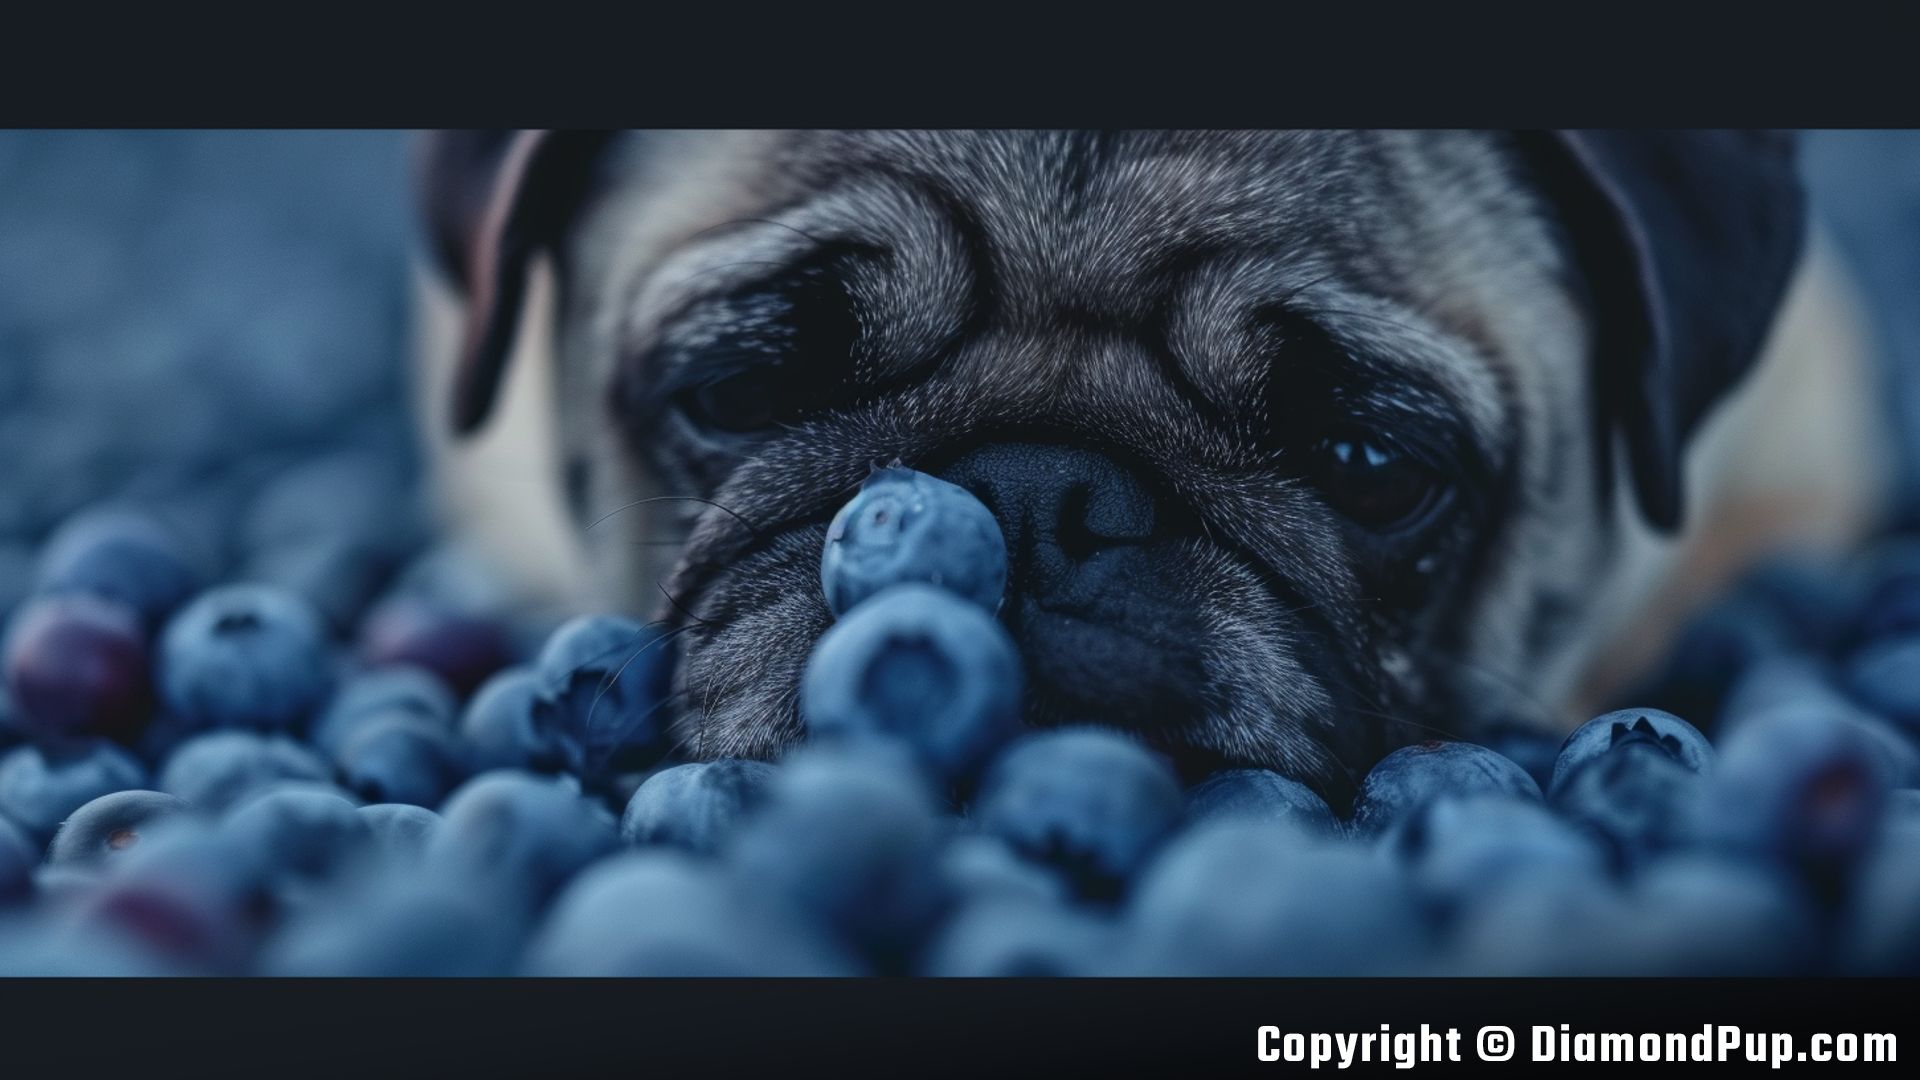 Photograph of a Playful Pug Eating Blueberries